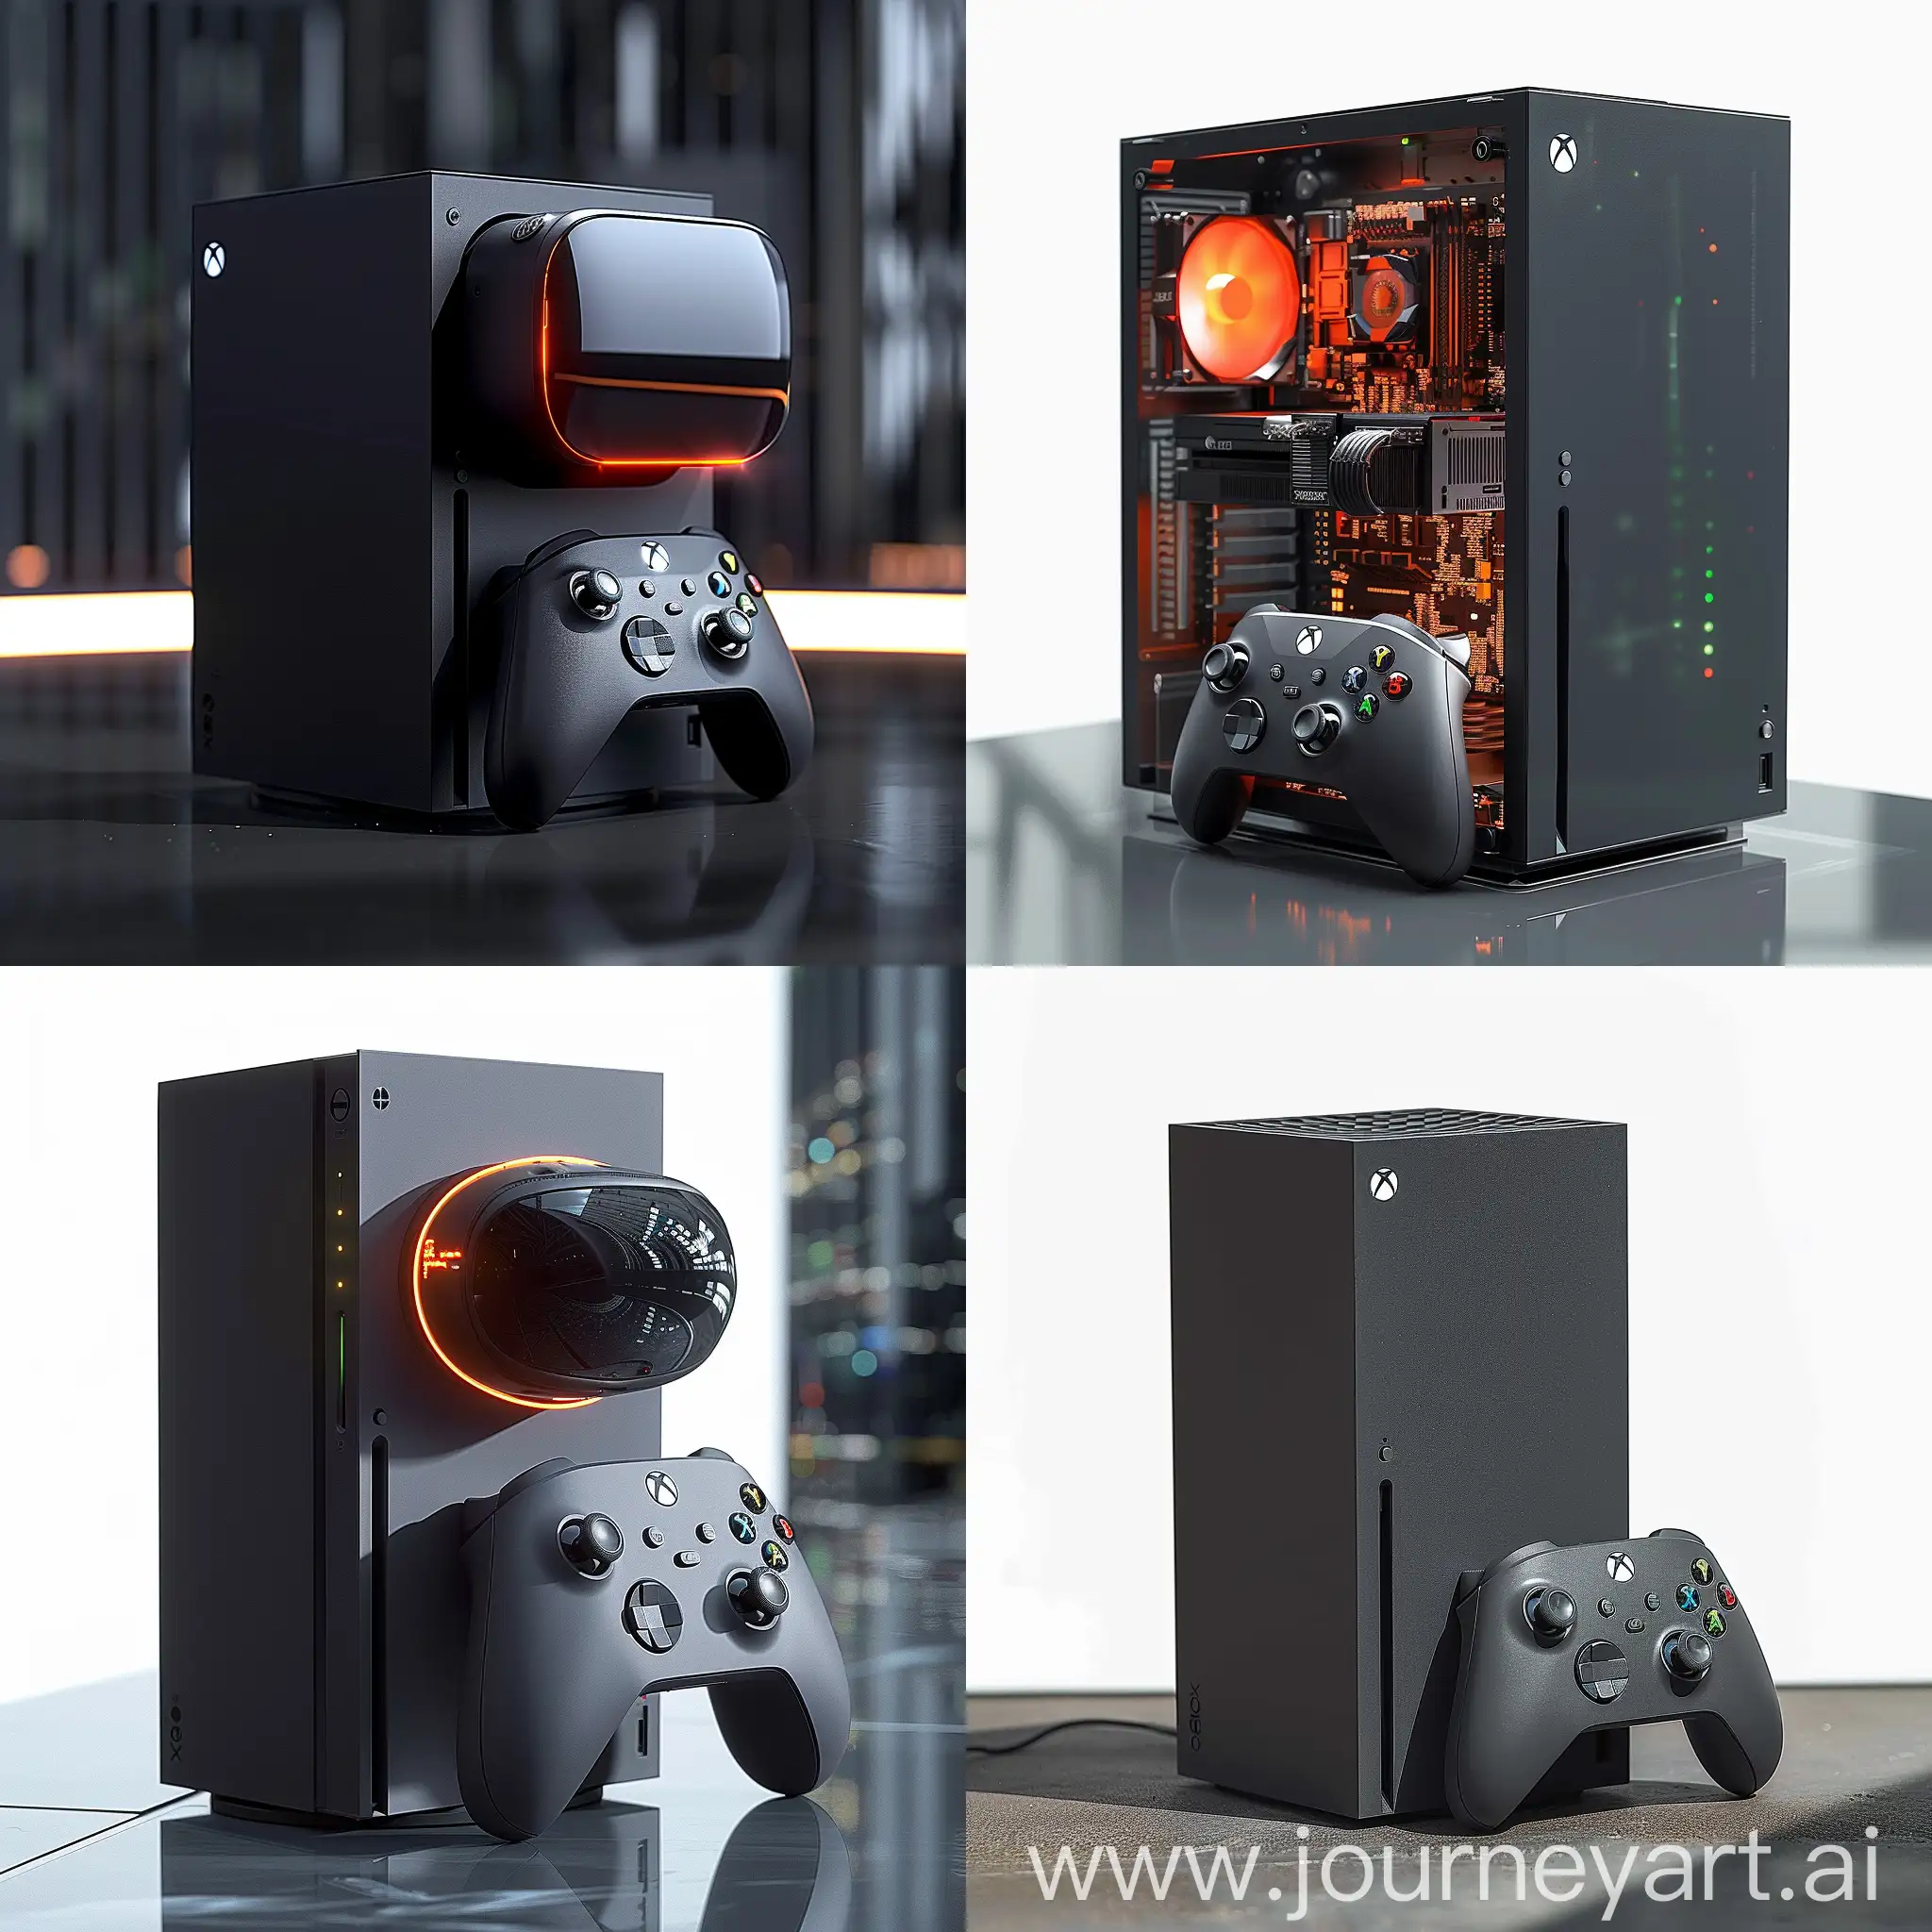 Futuristix Xbox Series X https://images-cdn.ubuy.co.in/650031d006906f37774b9024-2020-new-xbox-x-gaming-console.jpg:: sci-fi style, science fiction, Holographic Display, AI-powered Gameplay Assistance, Virtual Reality Integration, Gesture and Voice Control, Enhanced Graphics and Performance, Cloud Gaming Integration, Modular Design, Advanced Multiplayer Features, Immersive Sound Technology, Environmental Awareness, Holographic User Interface, Neural Interface:, Augmented Reality Integration, Time Manipulation Gameplay, Teleportation Hub, Shape-Shifting Controller, AI Companion, Biometric Feedback, Quantum Encryption, Dynamic Environments, octane render --stylize 1000